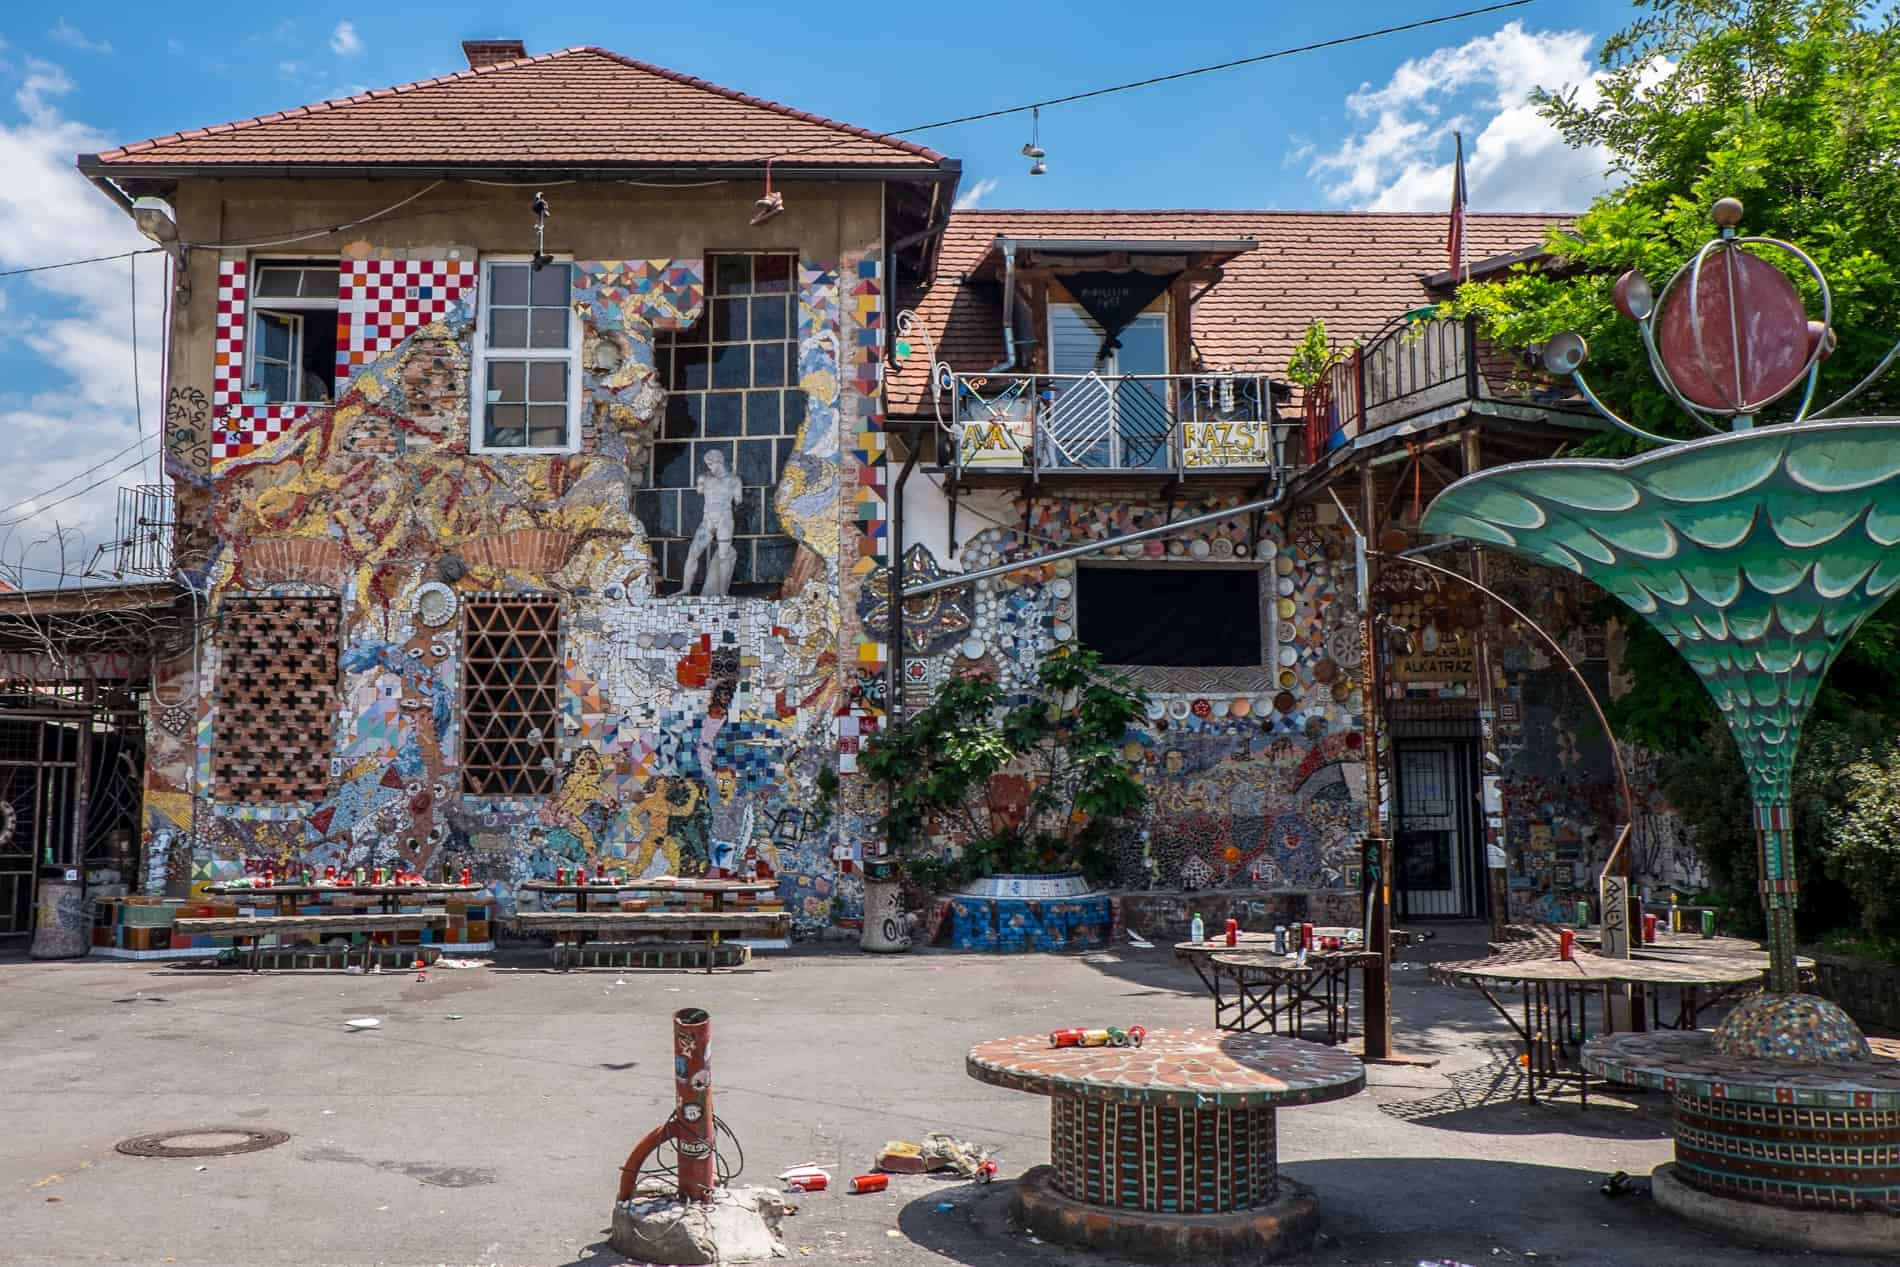 A mosaic covered bar and venue space in the Metelkova art space in Ljubljana. 